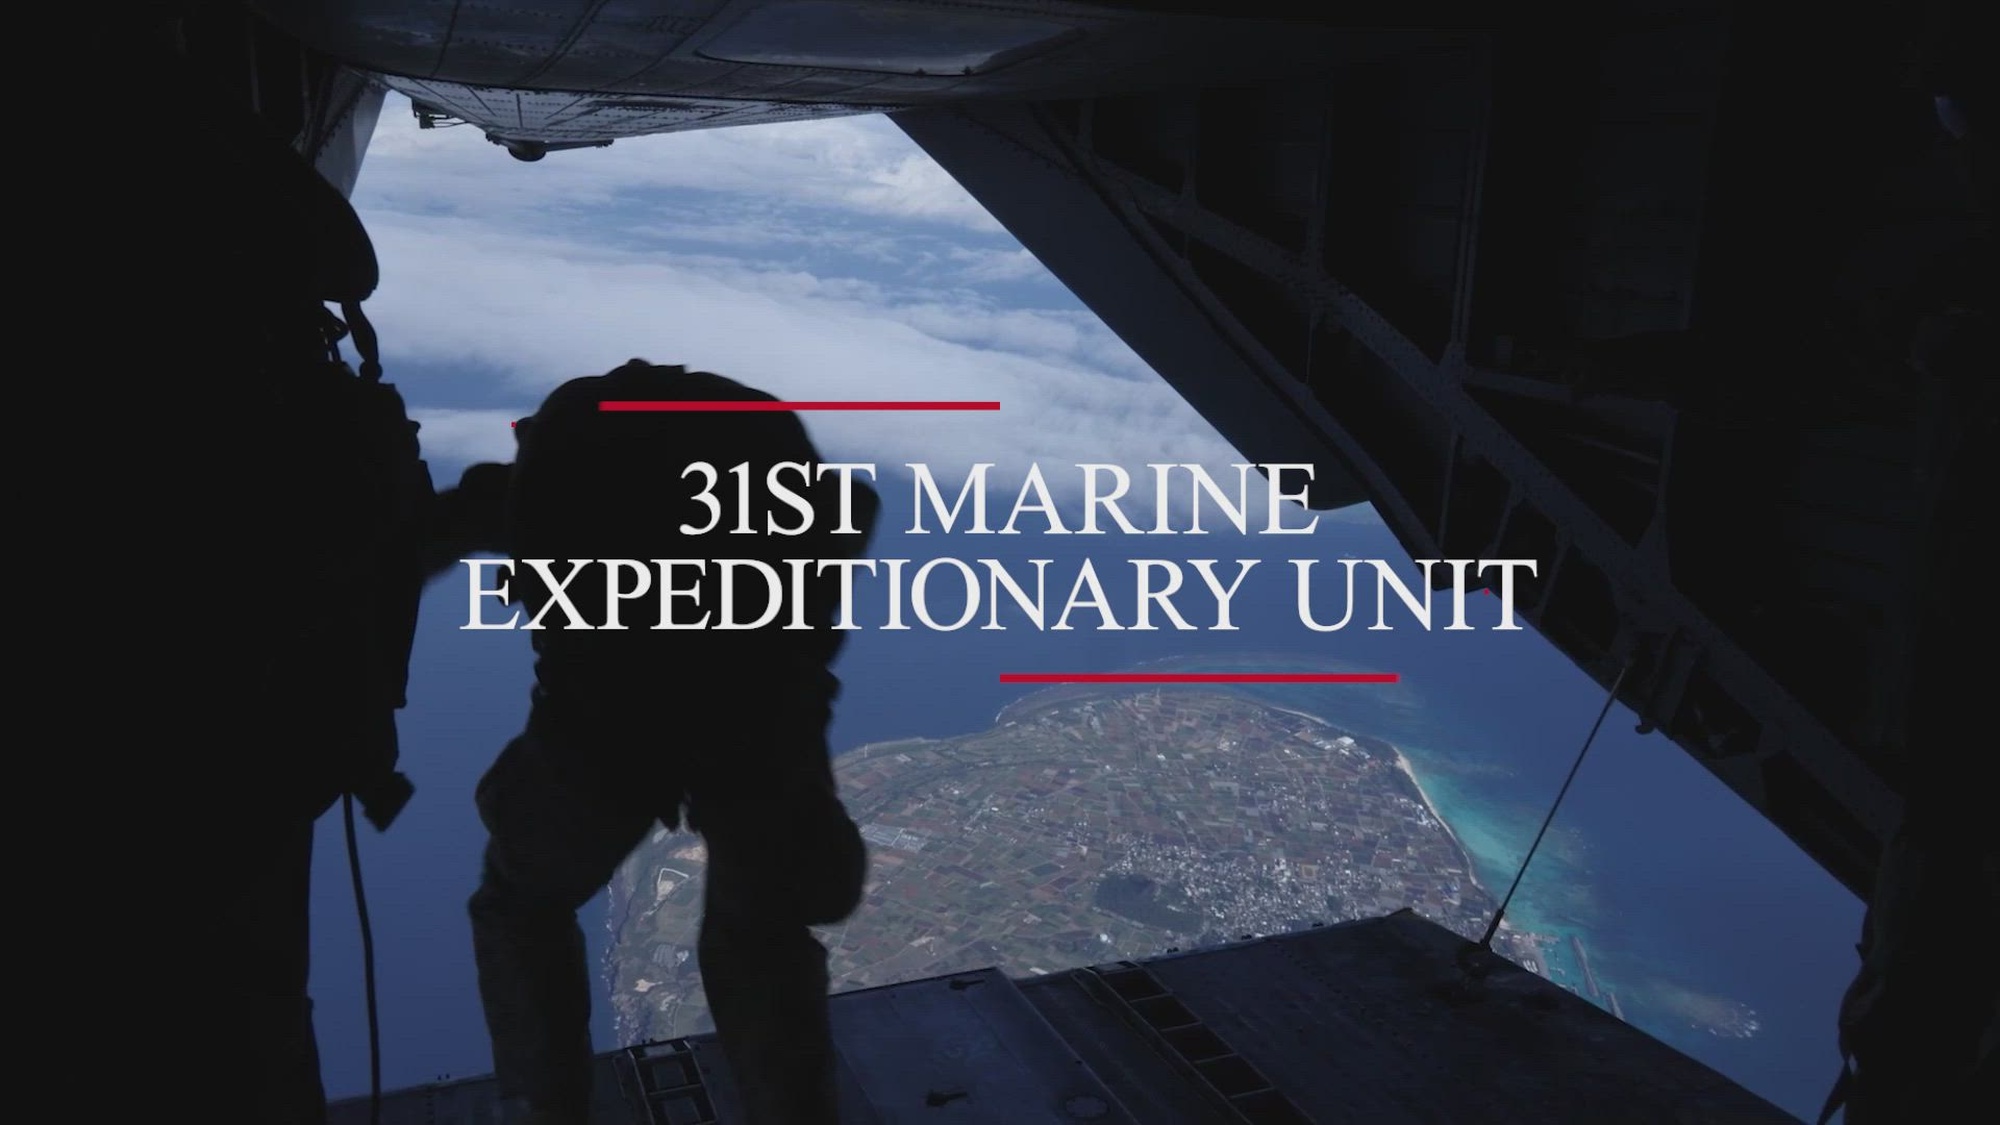 U.S. Marines with the 31st Marine Expeditionary Unit, commemorate two years overseas while embarked on ships from U.S. Navy Amphibious Squadron 11, across the Indo-Pacific region, during the command of Col. Matthew Danner, the commanding officer of the 31st MEU, between June 2, 2022 - May 20, 2024. Lt. Col. Brendan Neagle, the operations officer between 2021 - 2023, highlights the 31st MEU’s crisis response efforts in Bougainville, Papua New Guinea; the strengthened relationship with allies and partnerships; as well as the command climate and care for the Marines, which set the environment for the 31st MEU to succeed. The 31st MEU, the Marine Corps’ only continuously forward-deployed MEU, provides a flexible and lethal force ready to perform a wide range of military operations as the premiere crisis response force in the Indo-Pacific region. (U.S. Marine Corps video by Cpl. Christopher R. Lape)

This video contains music from a USMC enterprise licensed asset from Adobe Stock: “A Battle for the Future,” performed by Eoin Mantell.